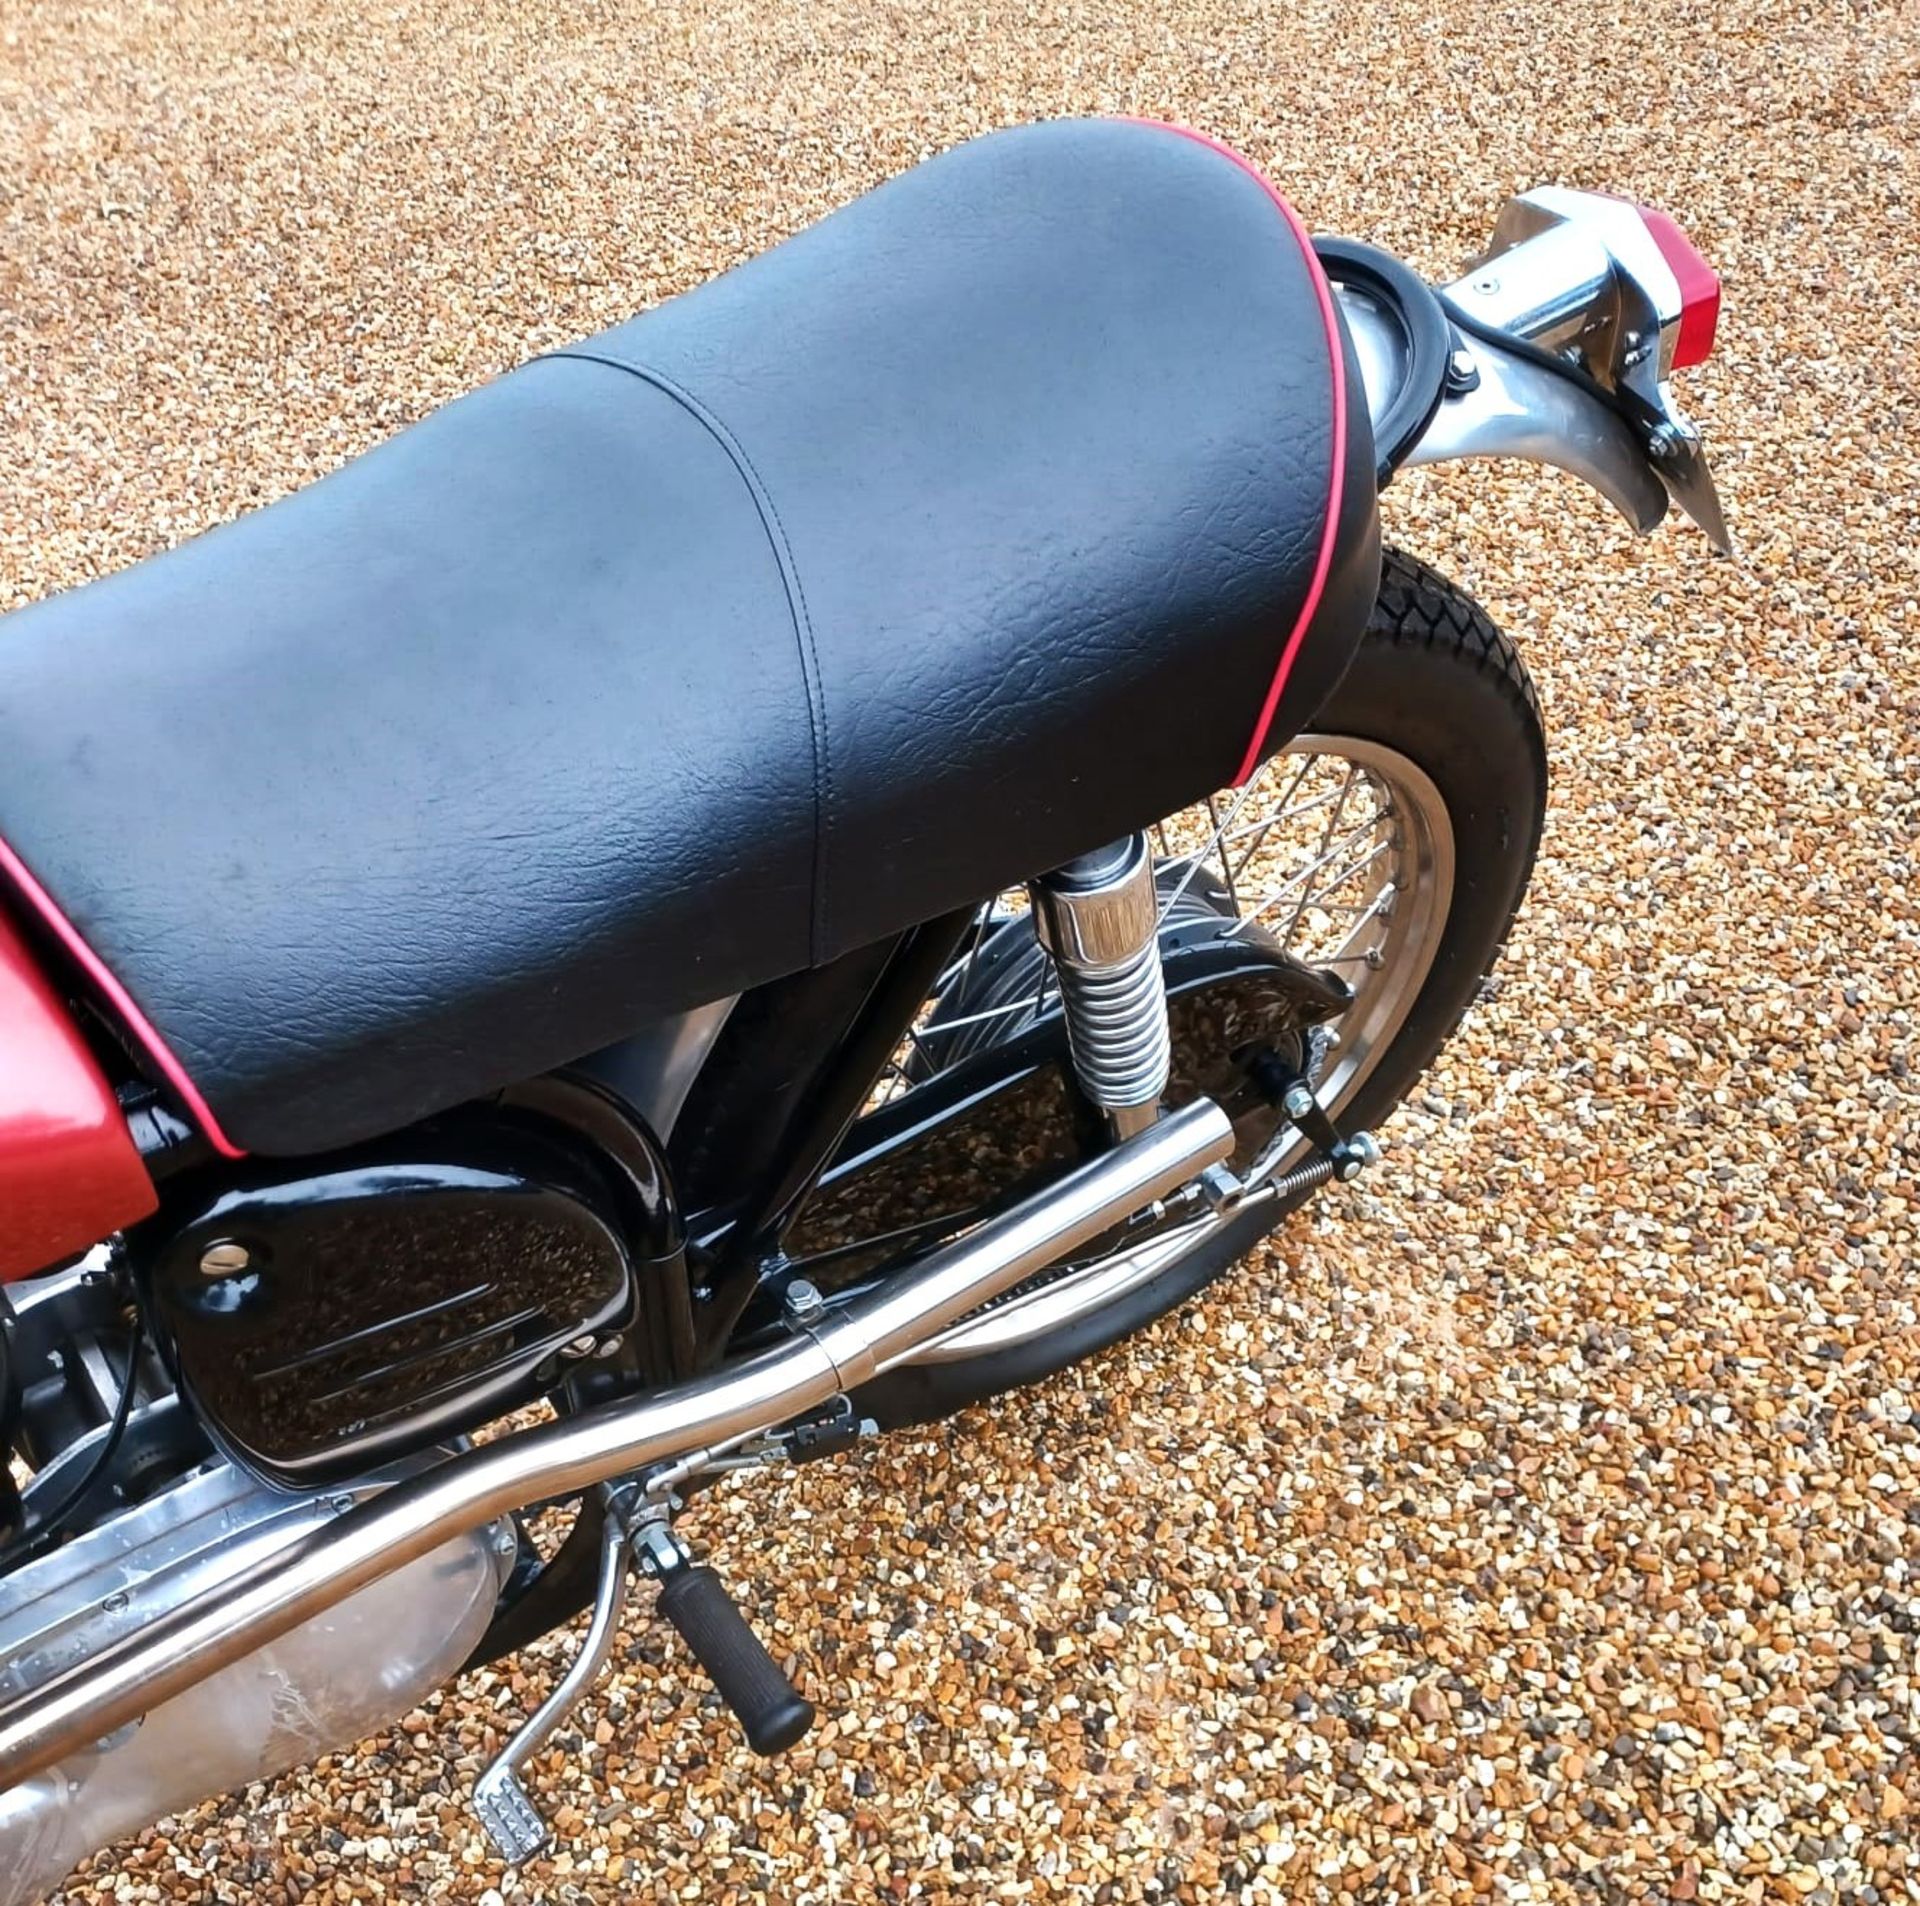 1969 TRITON 500cc Registration Number: WHW 241H Frame Number: TBA Recorded Mileage: 1658 - Subject - Image 12 of 14